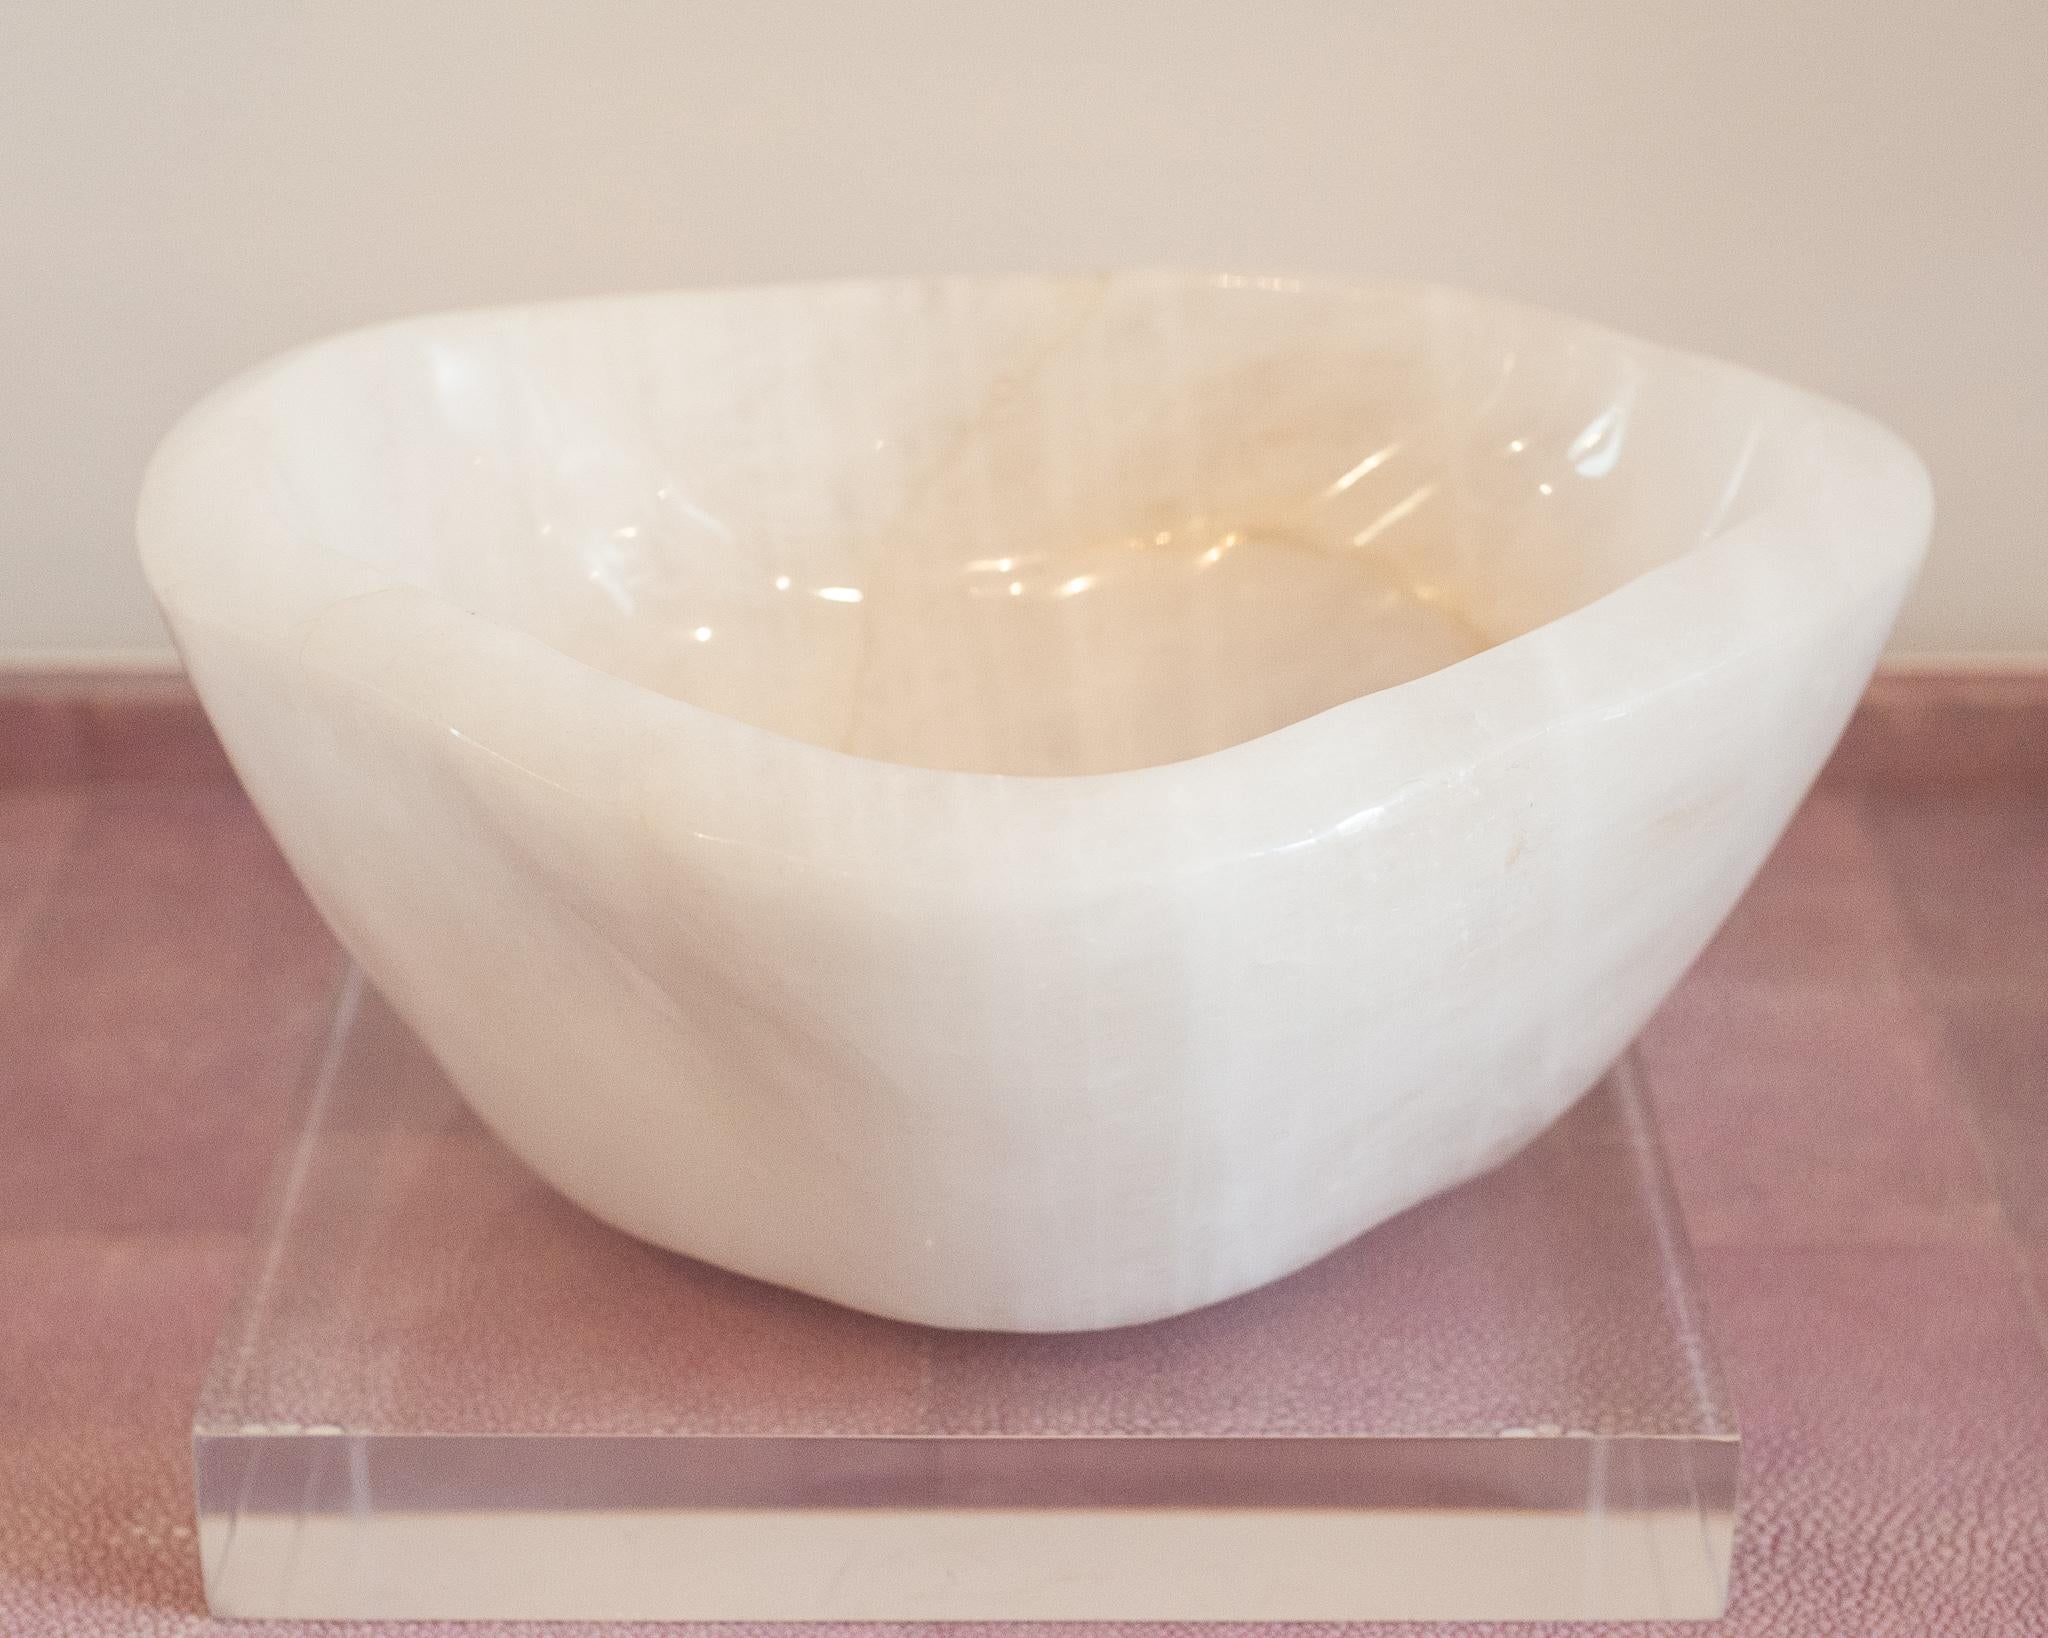 Bring the healing energy of rock crystal quartz into your home with this beautiful carved bowl. This substantial and thick cut bowl can filled with candies or kept sculptural as an empty vessel and placed in any space.